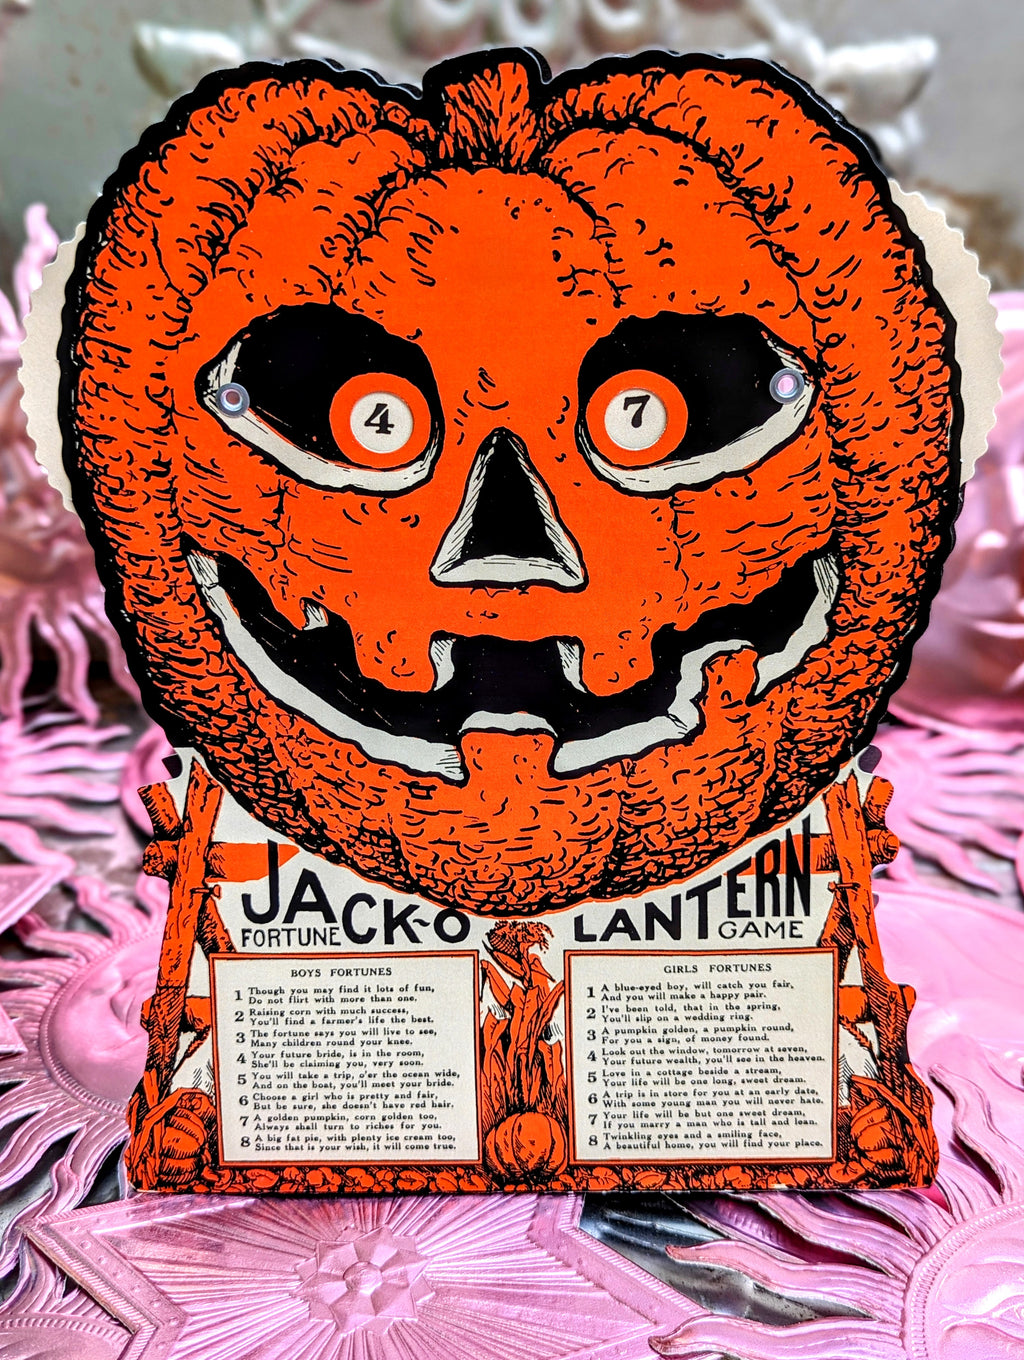 Gorgeous American 1960s style, beautifully illustrated  Jack-O-Lantern game for witchy woo vintage style  Halloween festivities, a totally lovely bit of vintage styling for Halloween displays, window creativity and the marking of the dark nights

25 x 20 cm

Printed card.